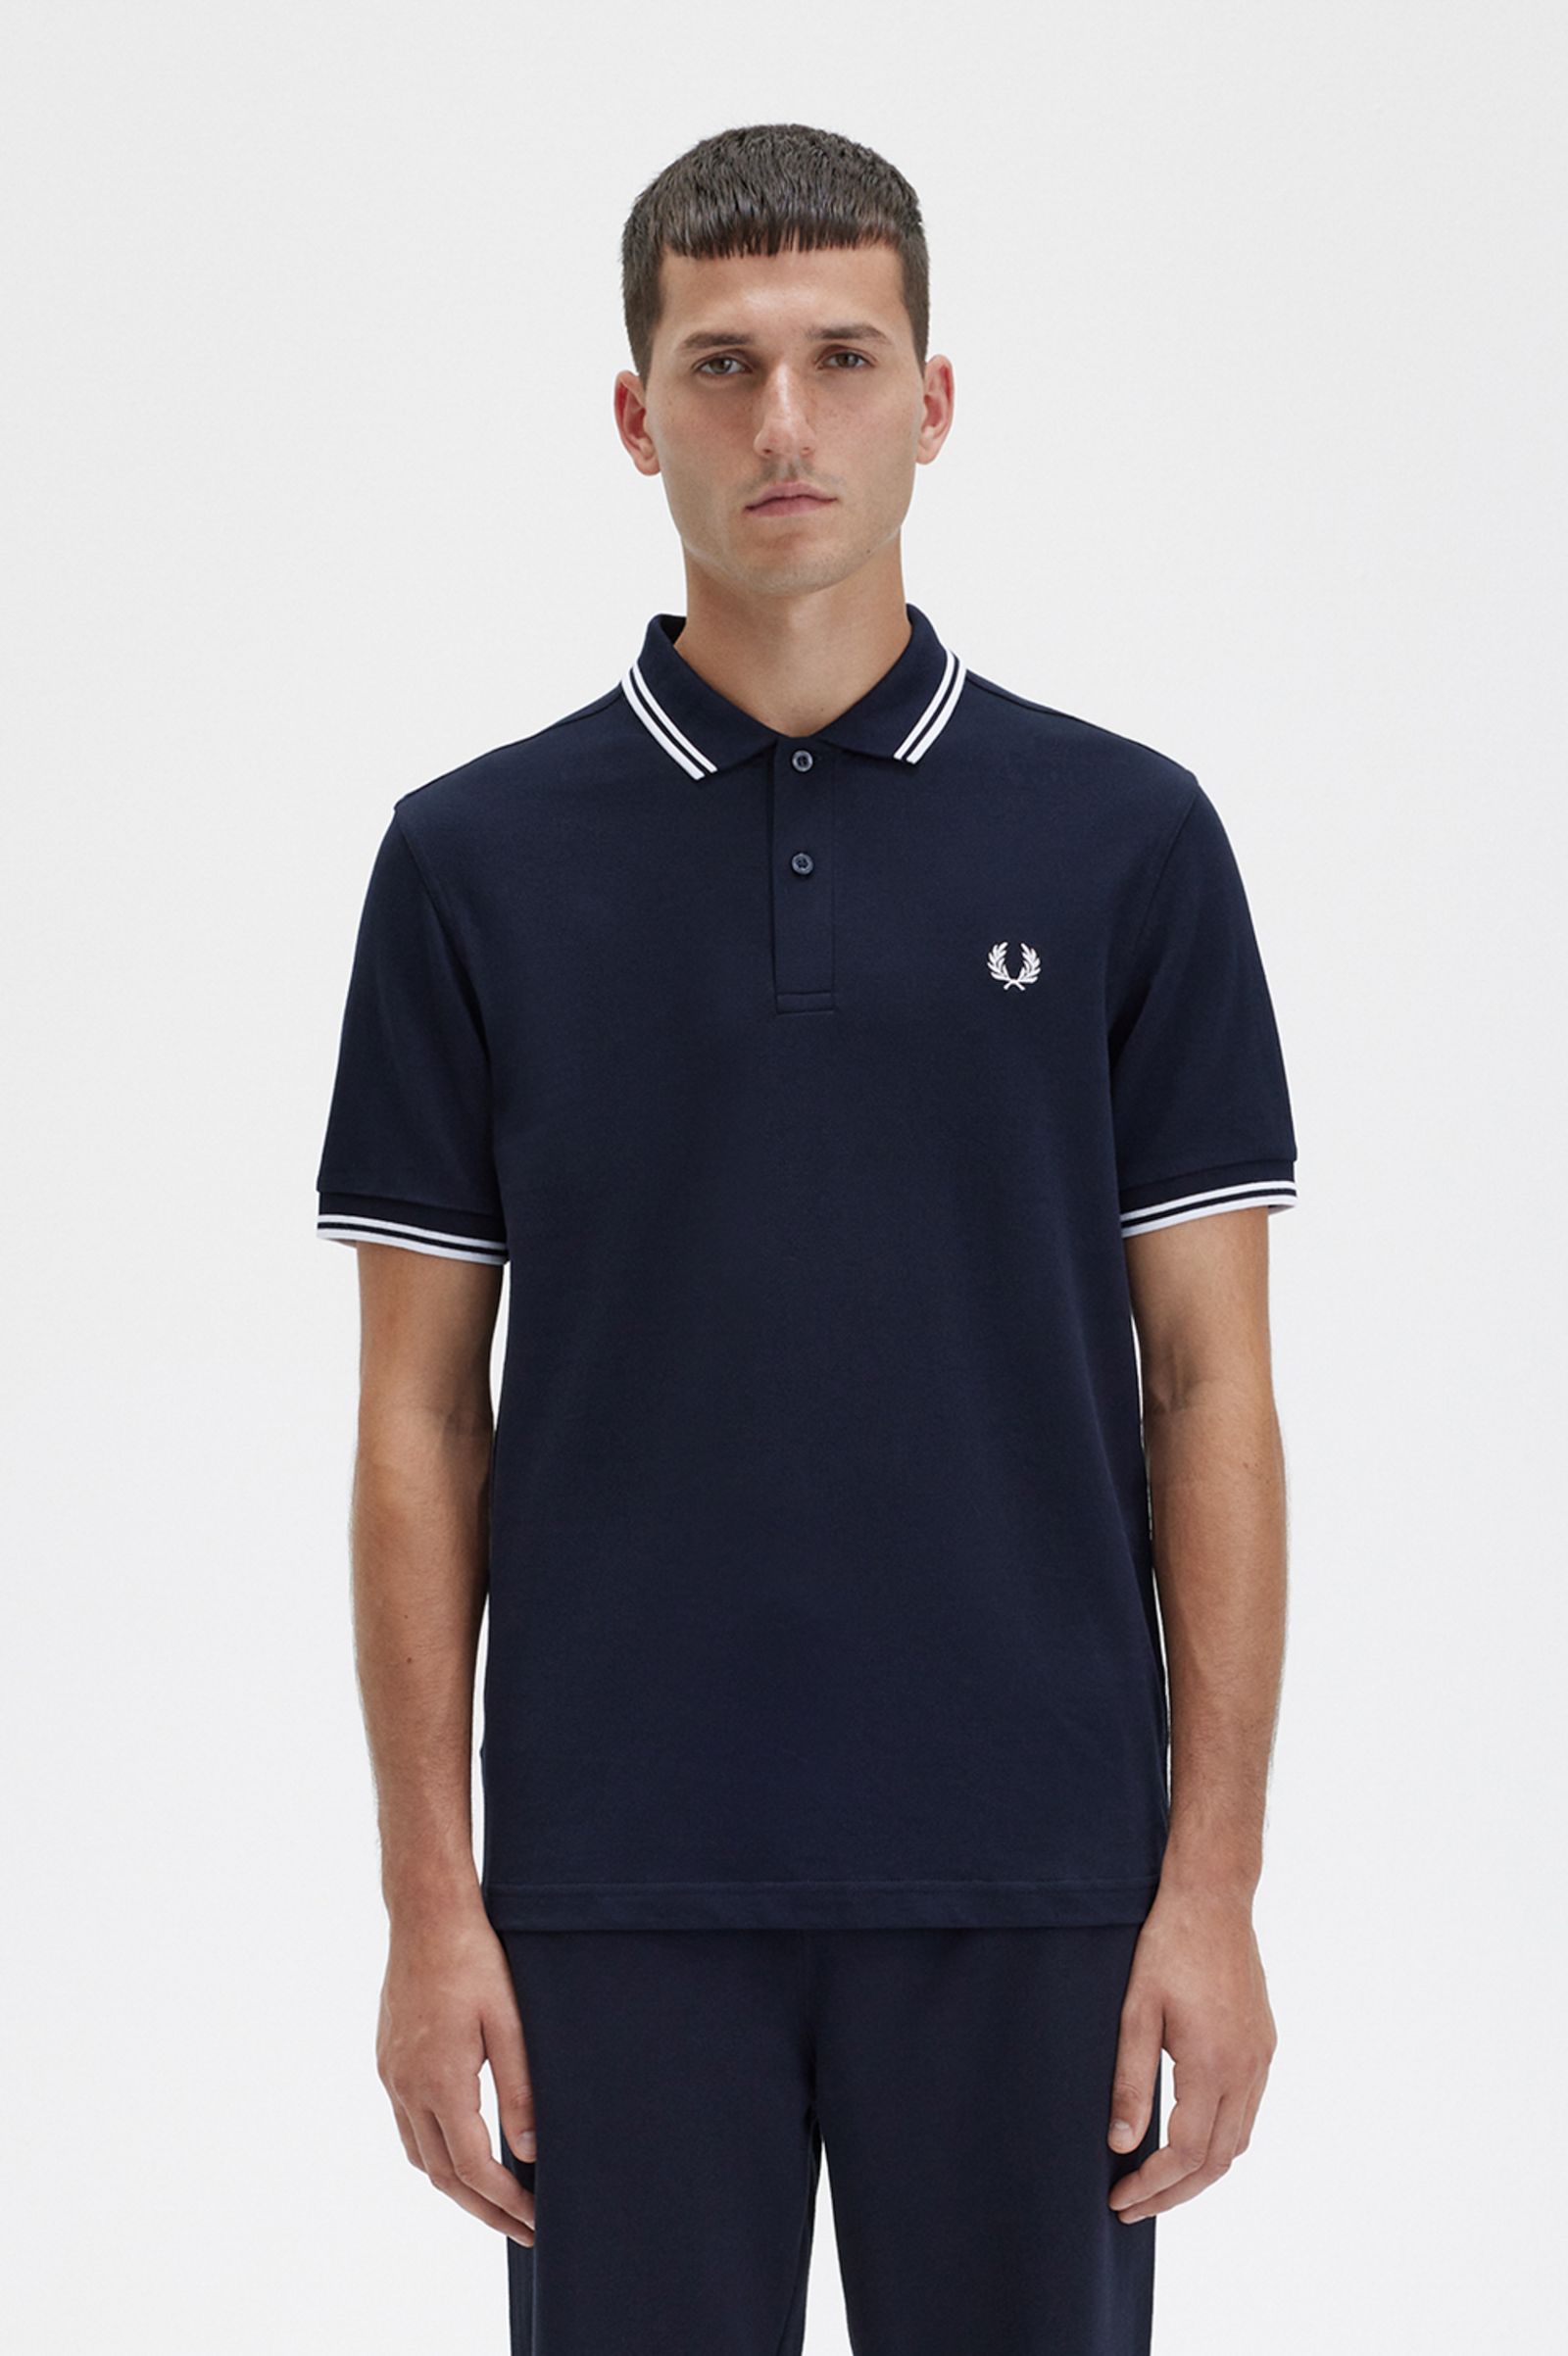 M3600 - Navy / White / White, The Fred Perry Shirt